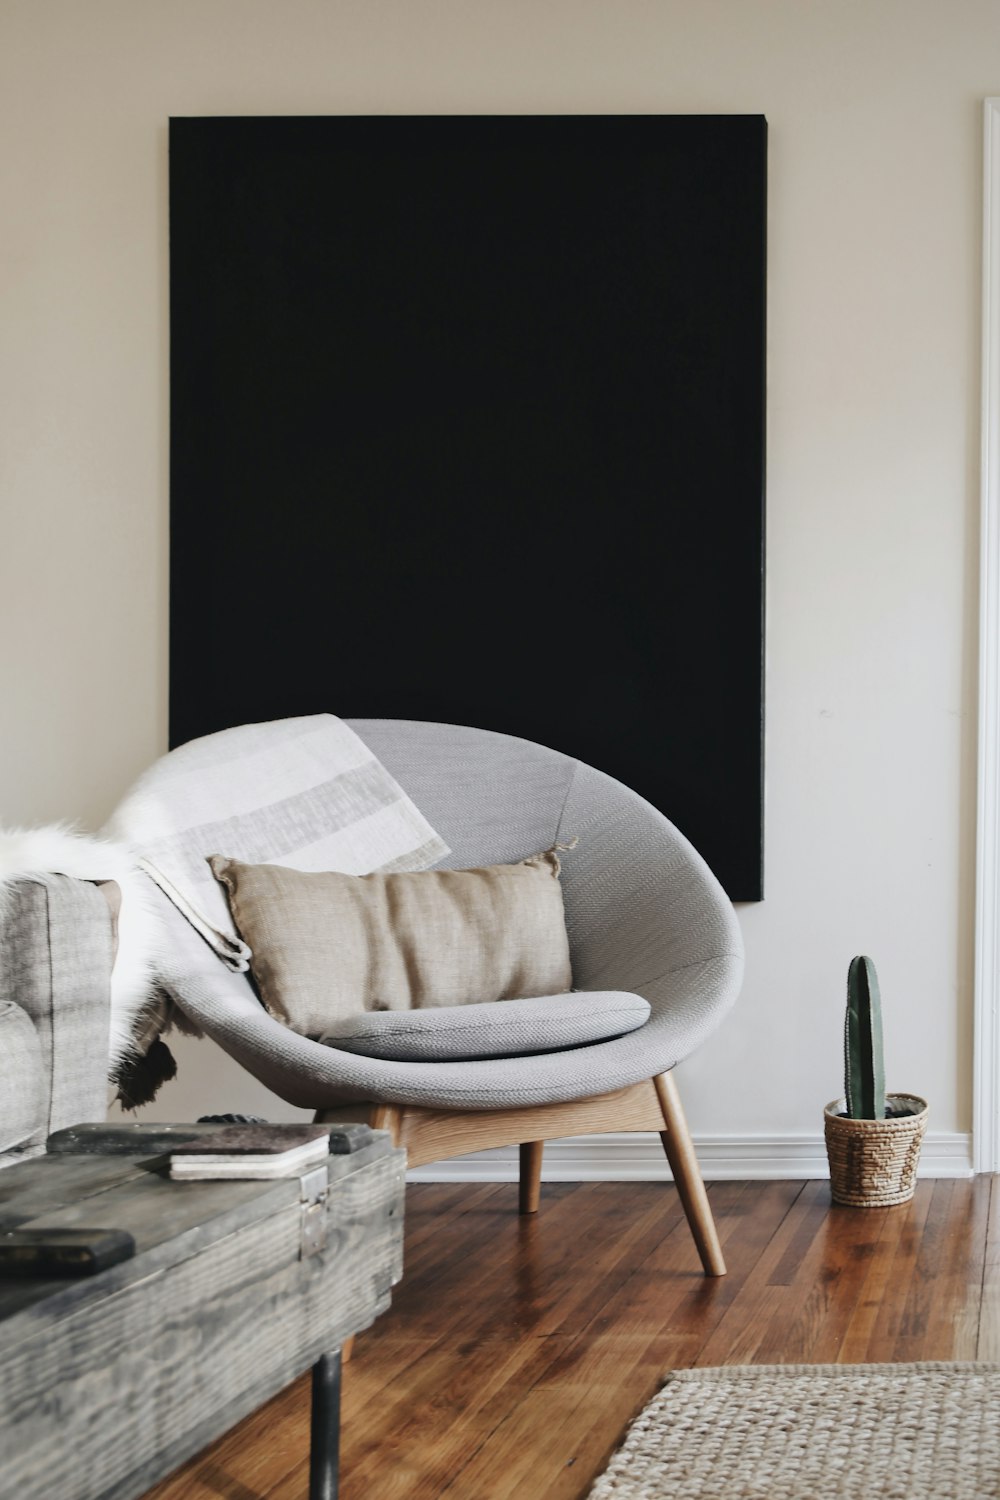 round grey moon chair with brown pillow on top